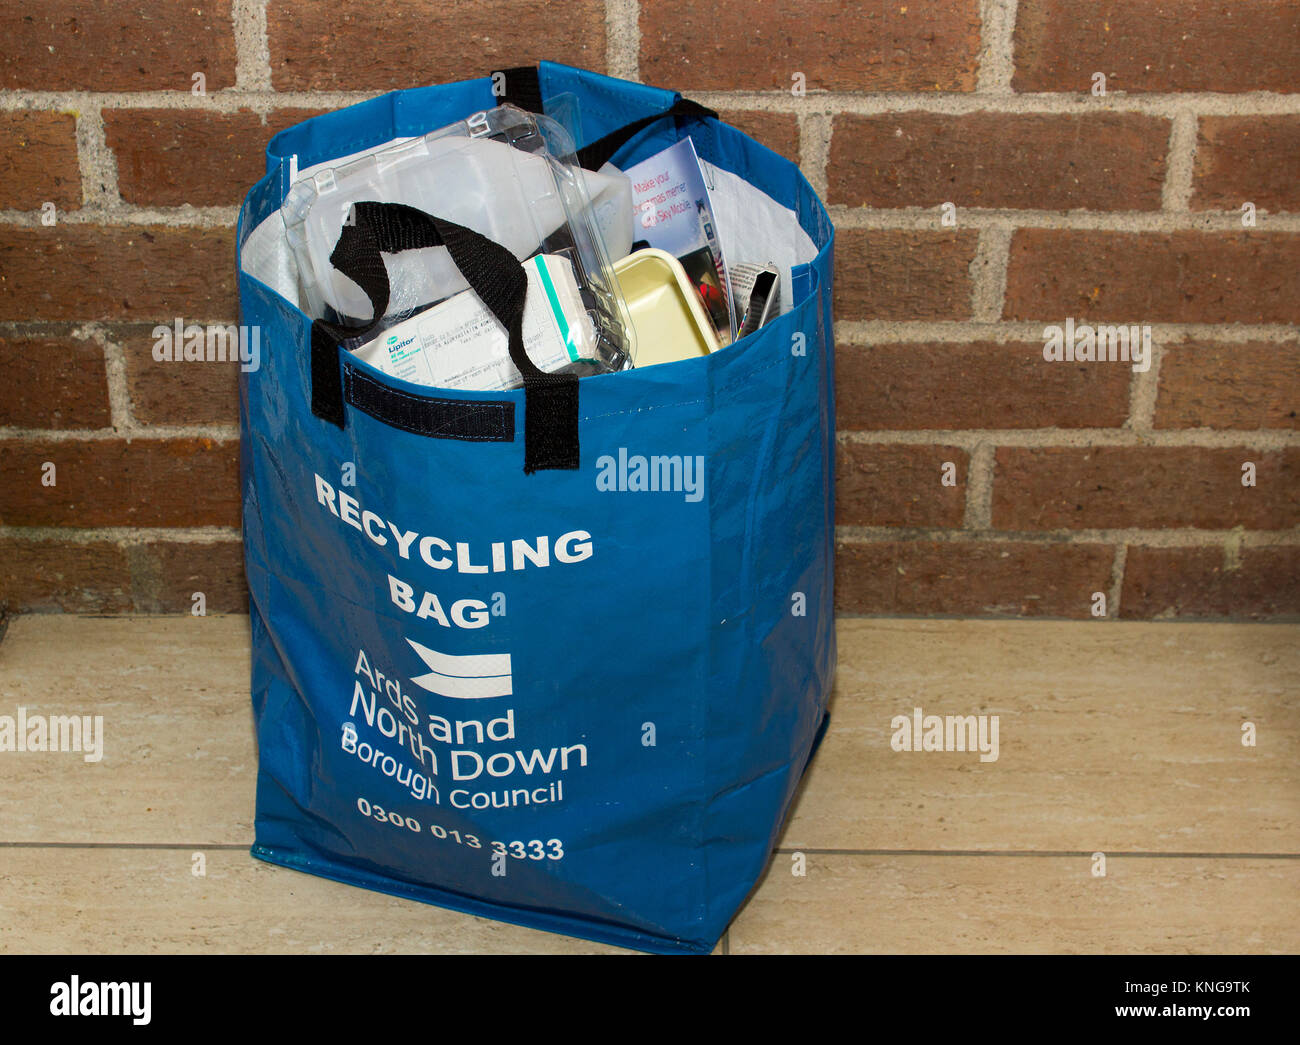 https://c8.alamy.com/comp/KNG9TK/a-large-recycling-bag-of-recyclable-household-waste-collected-in-a-KNG9TK.jpg